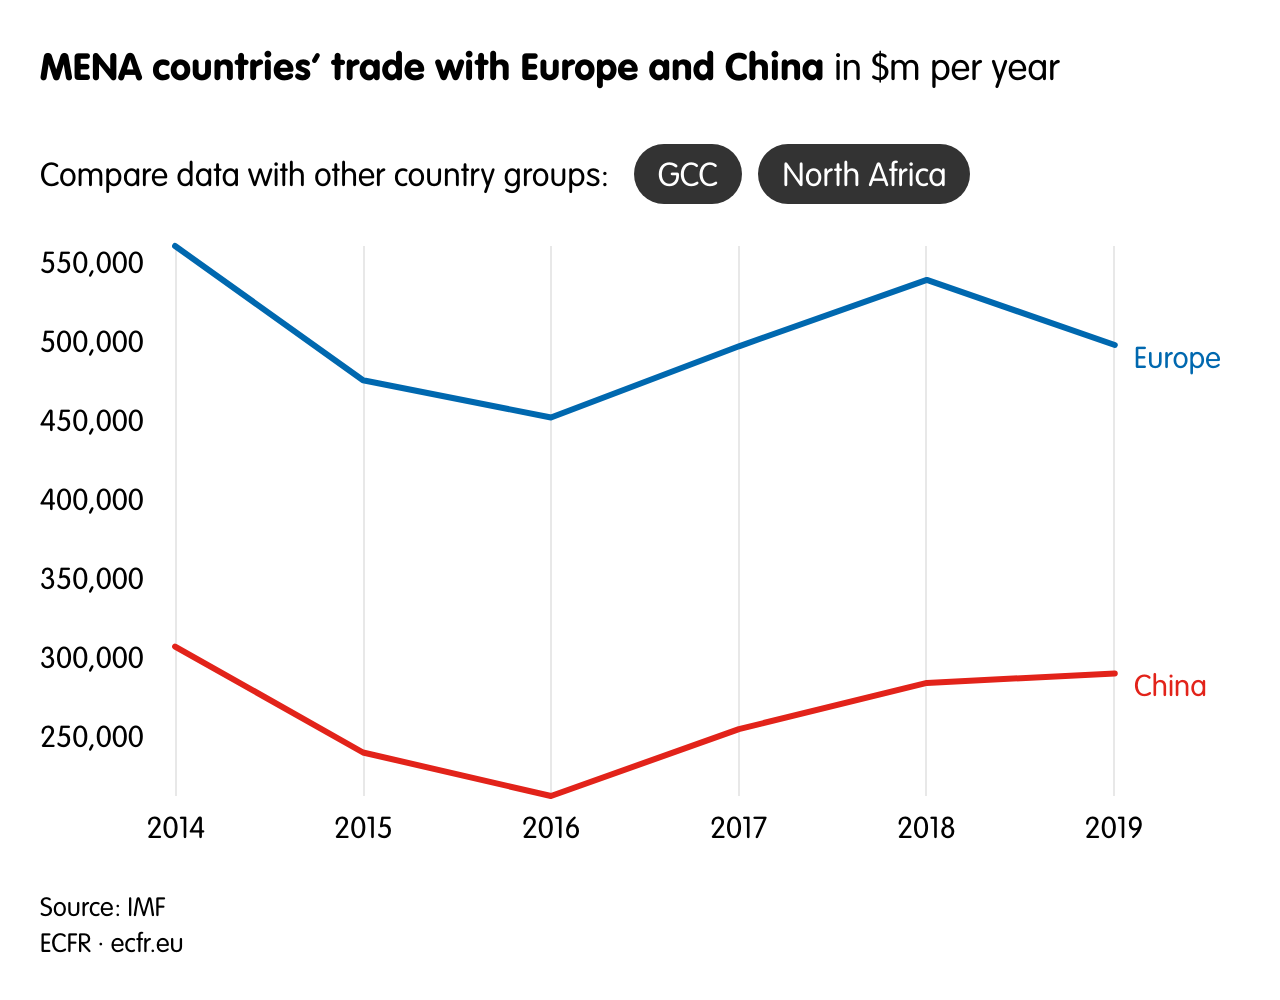 MENA countries’ trade with Europe and China